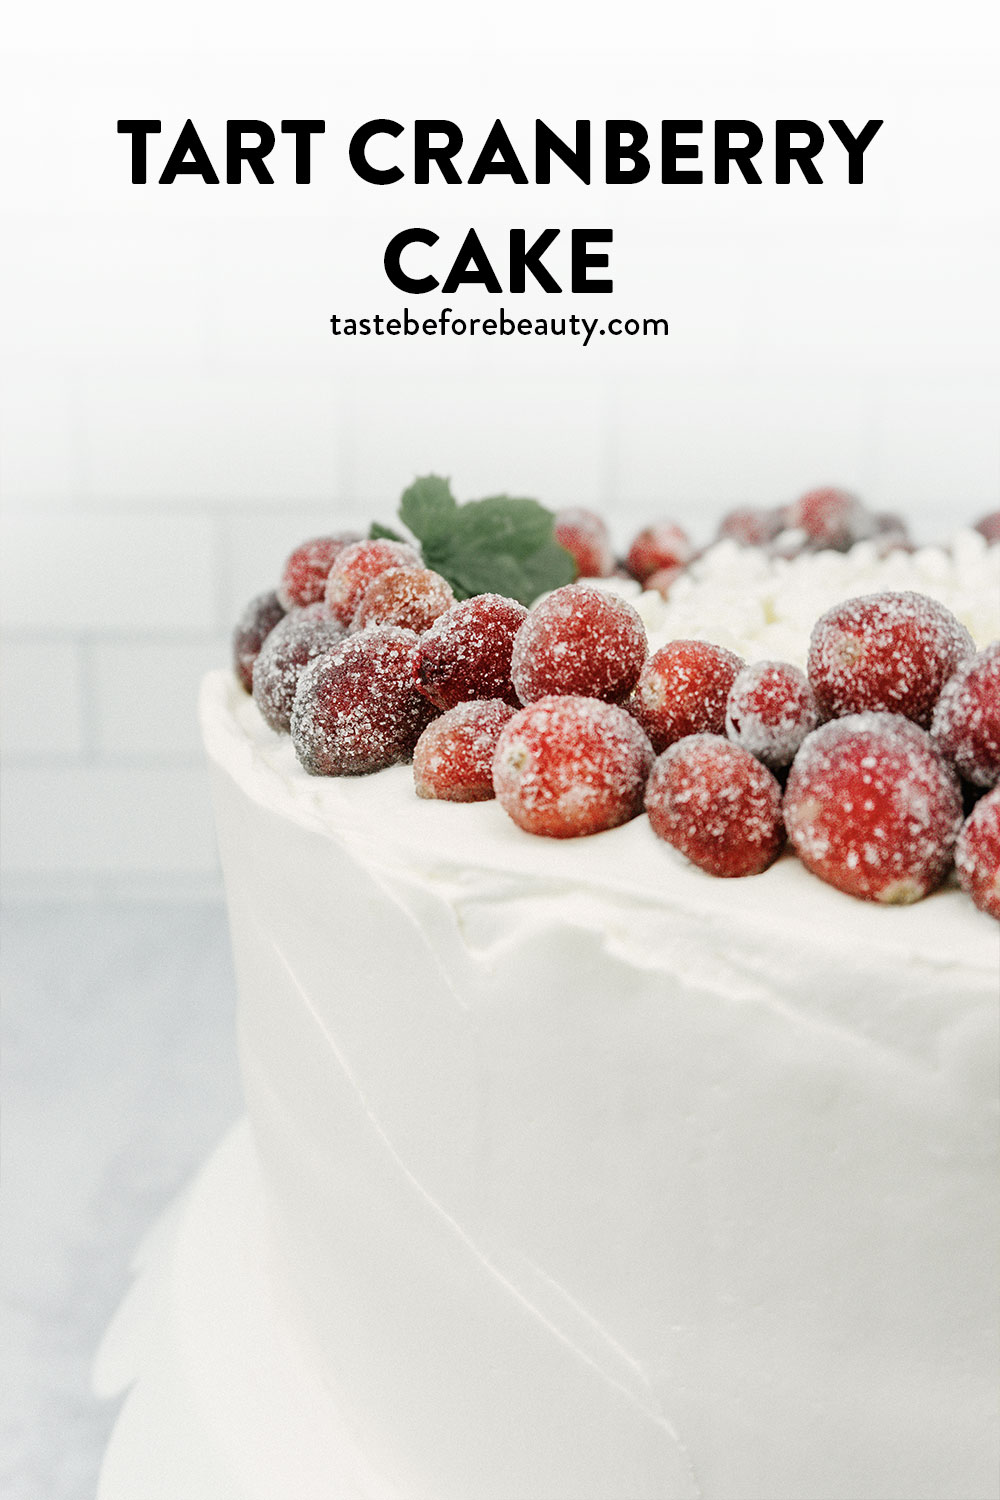 taste before beauty tart cranberry cake with sugar cranberries on top